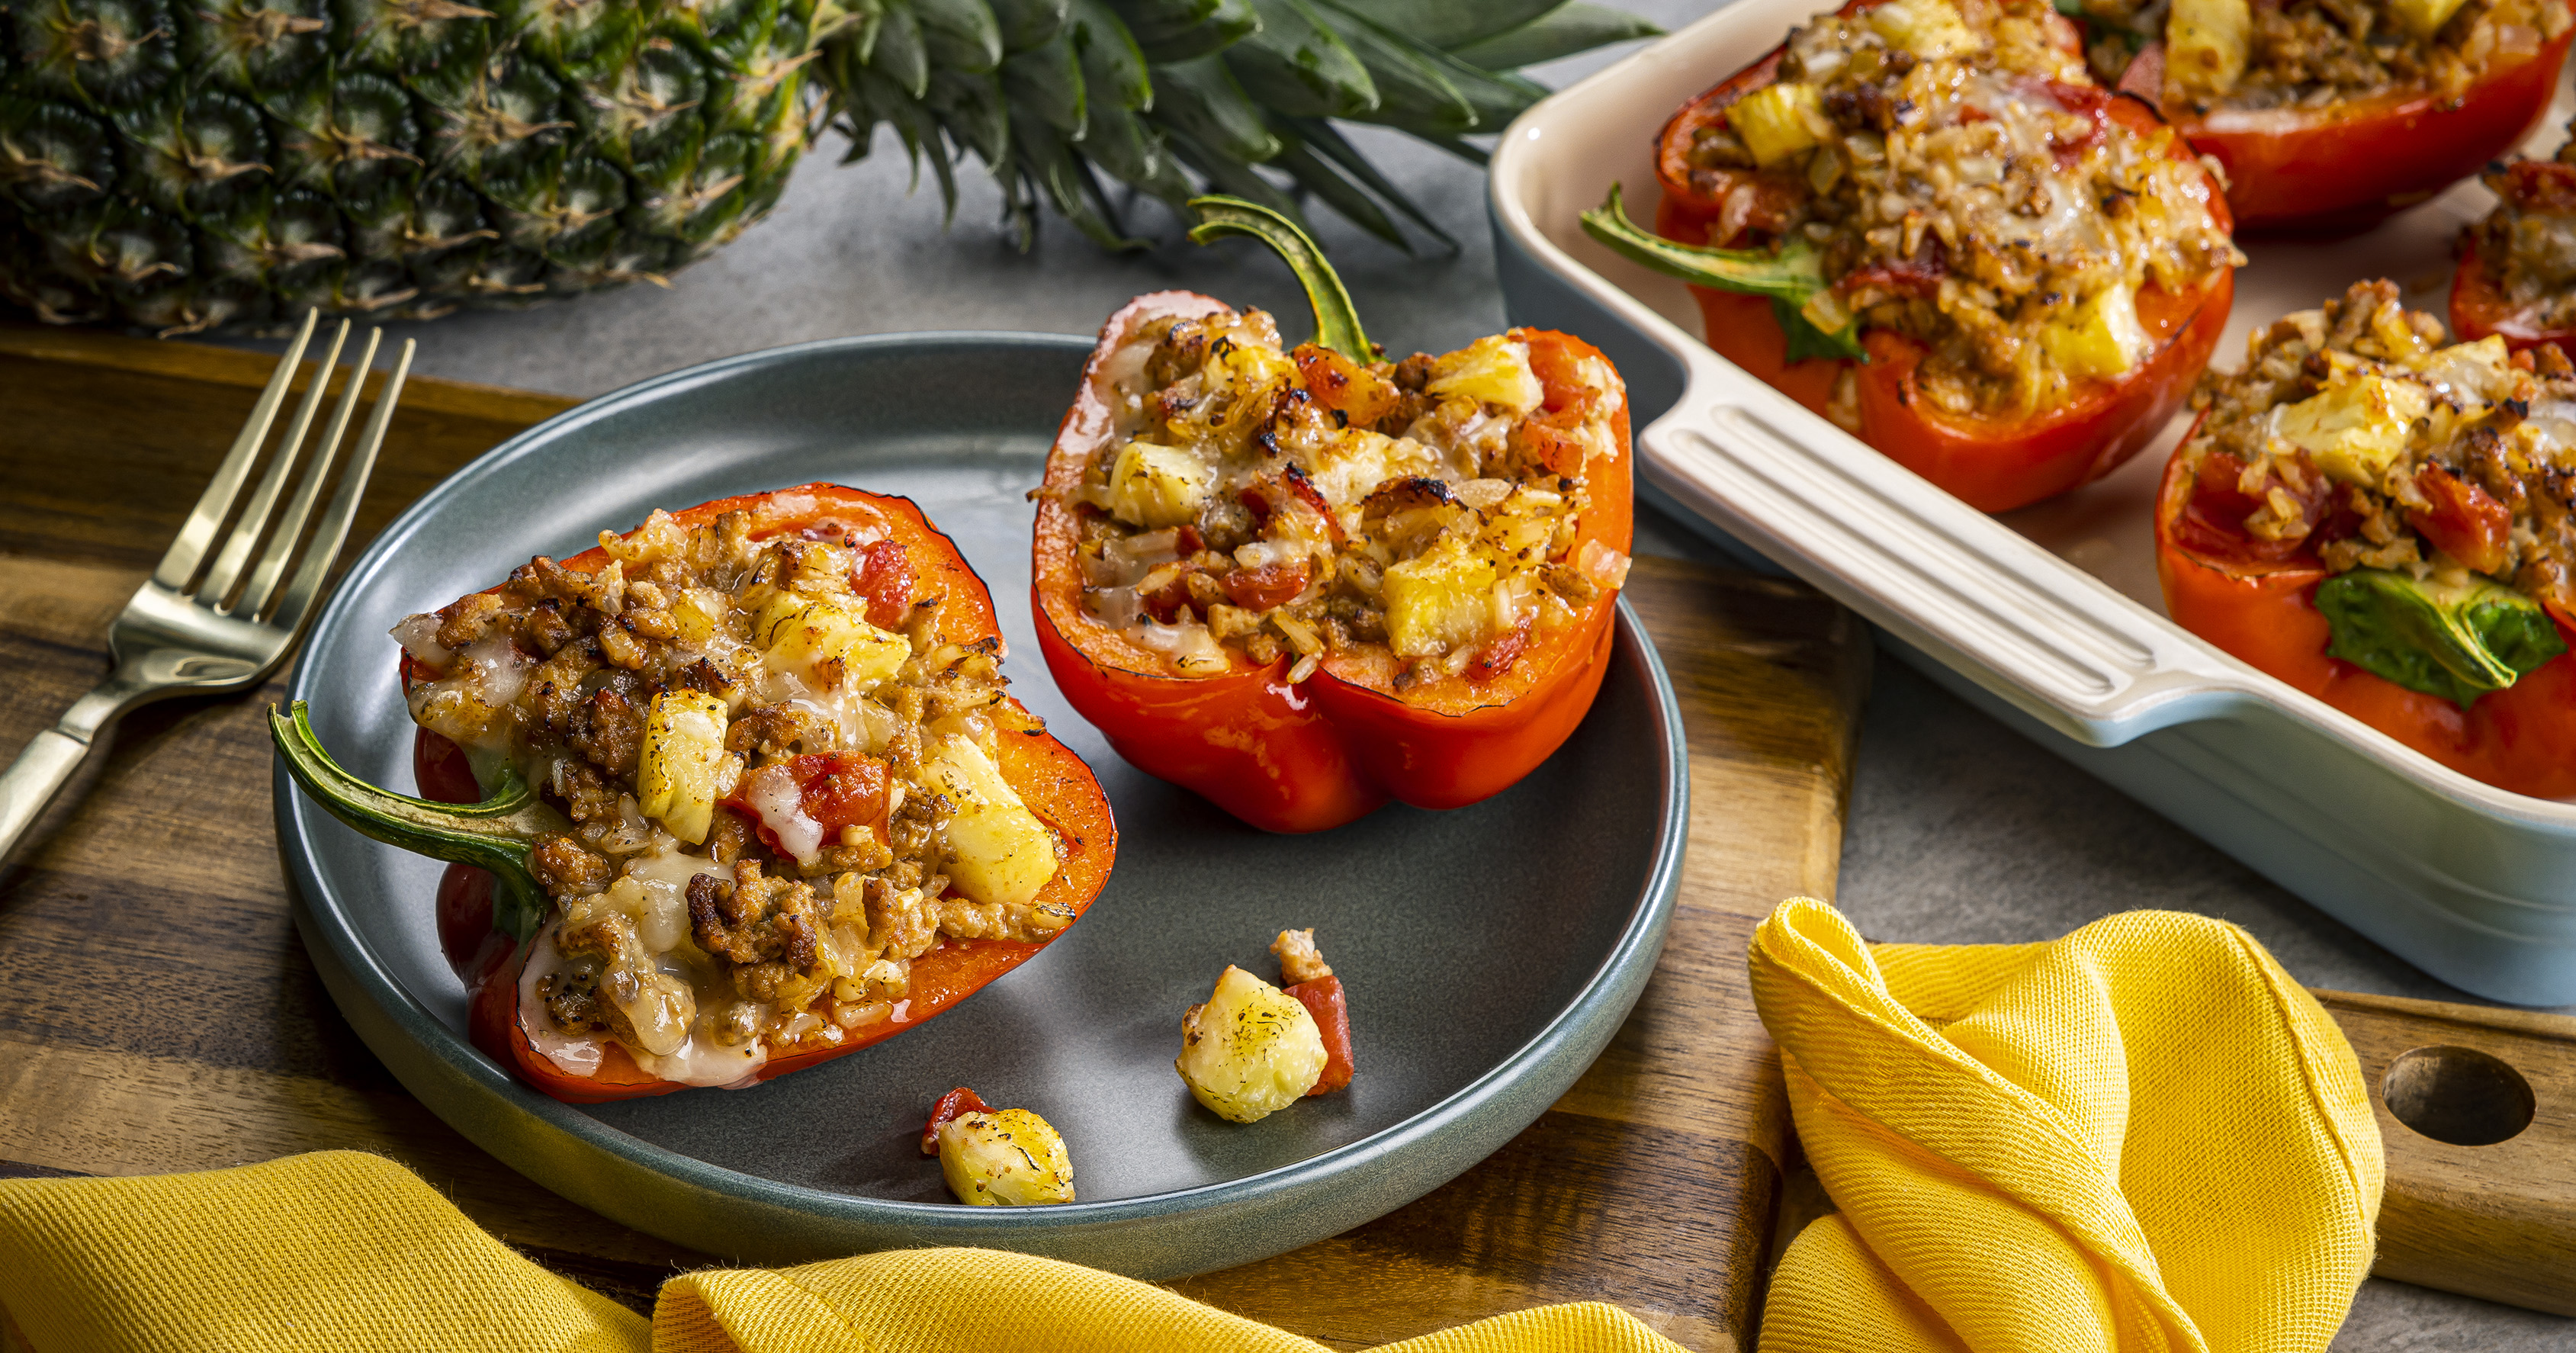 Unbelievable Turkey and Pineapple Infused Stuffed Peppers